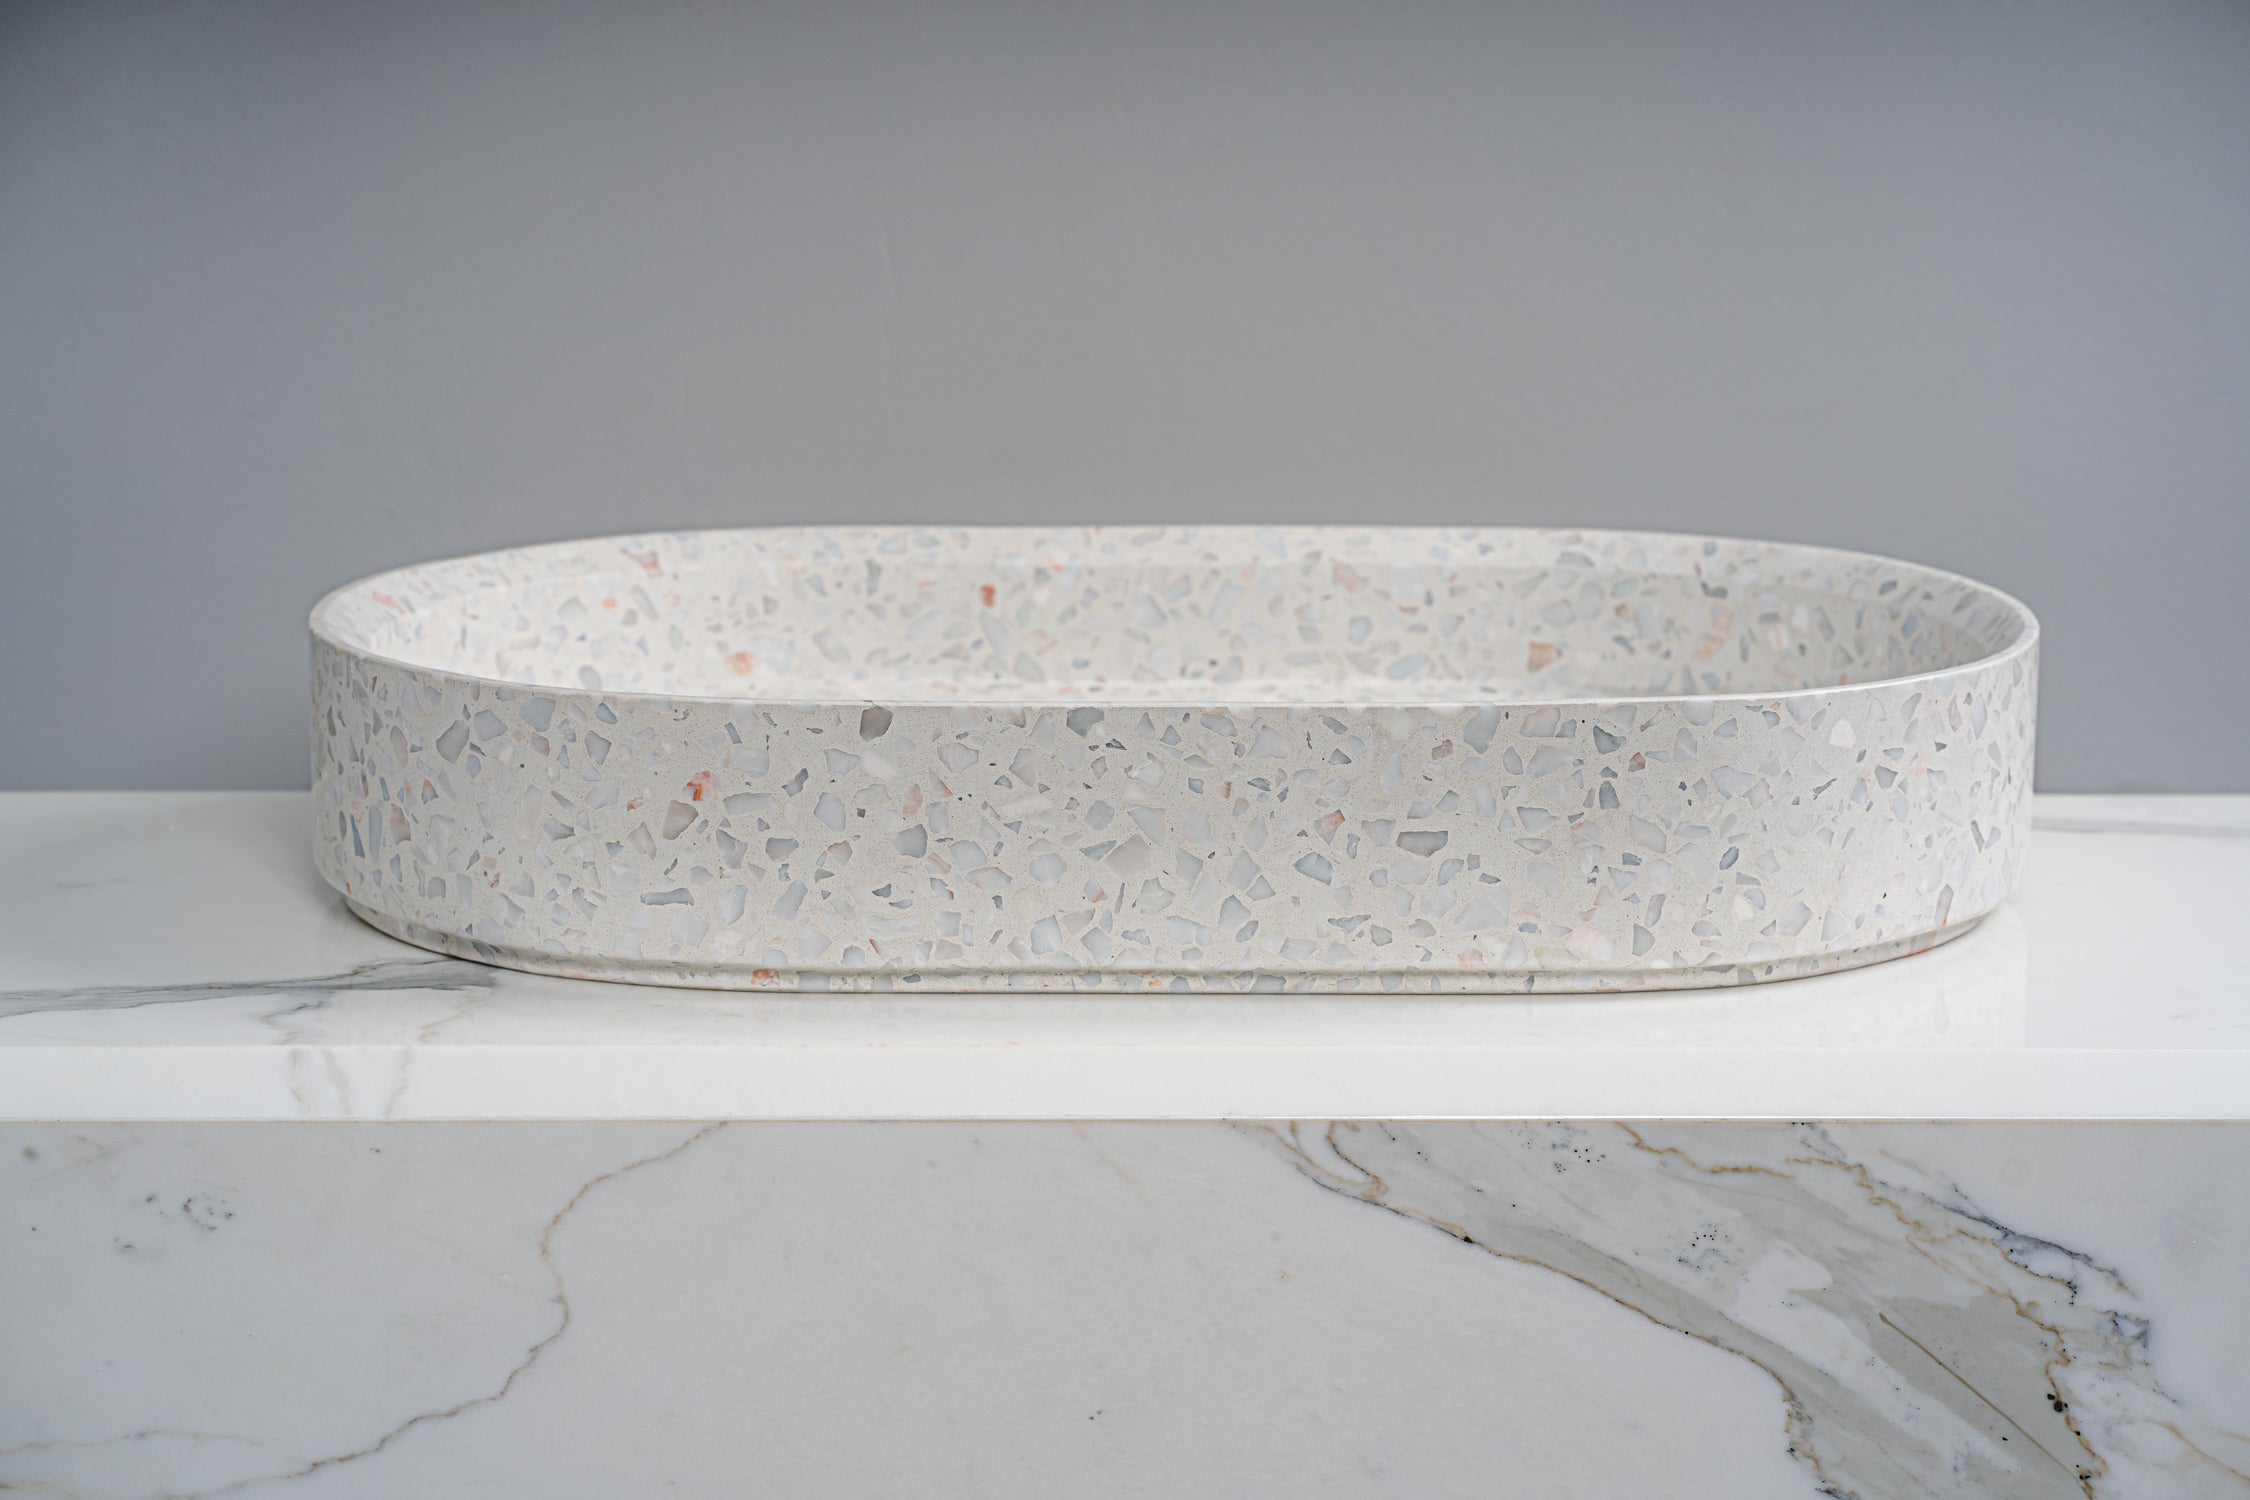 GALLARIA DIAL OUT MERRAZZO OVAL ABOVE COUNTER STONE BASIN SNEAKY PEACH 600MM